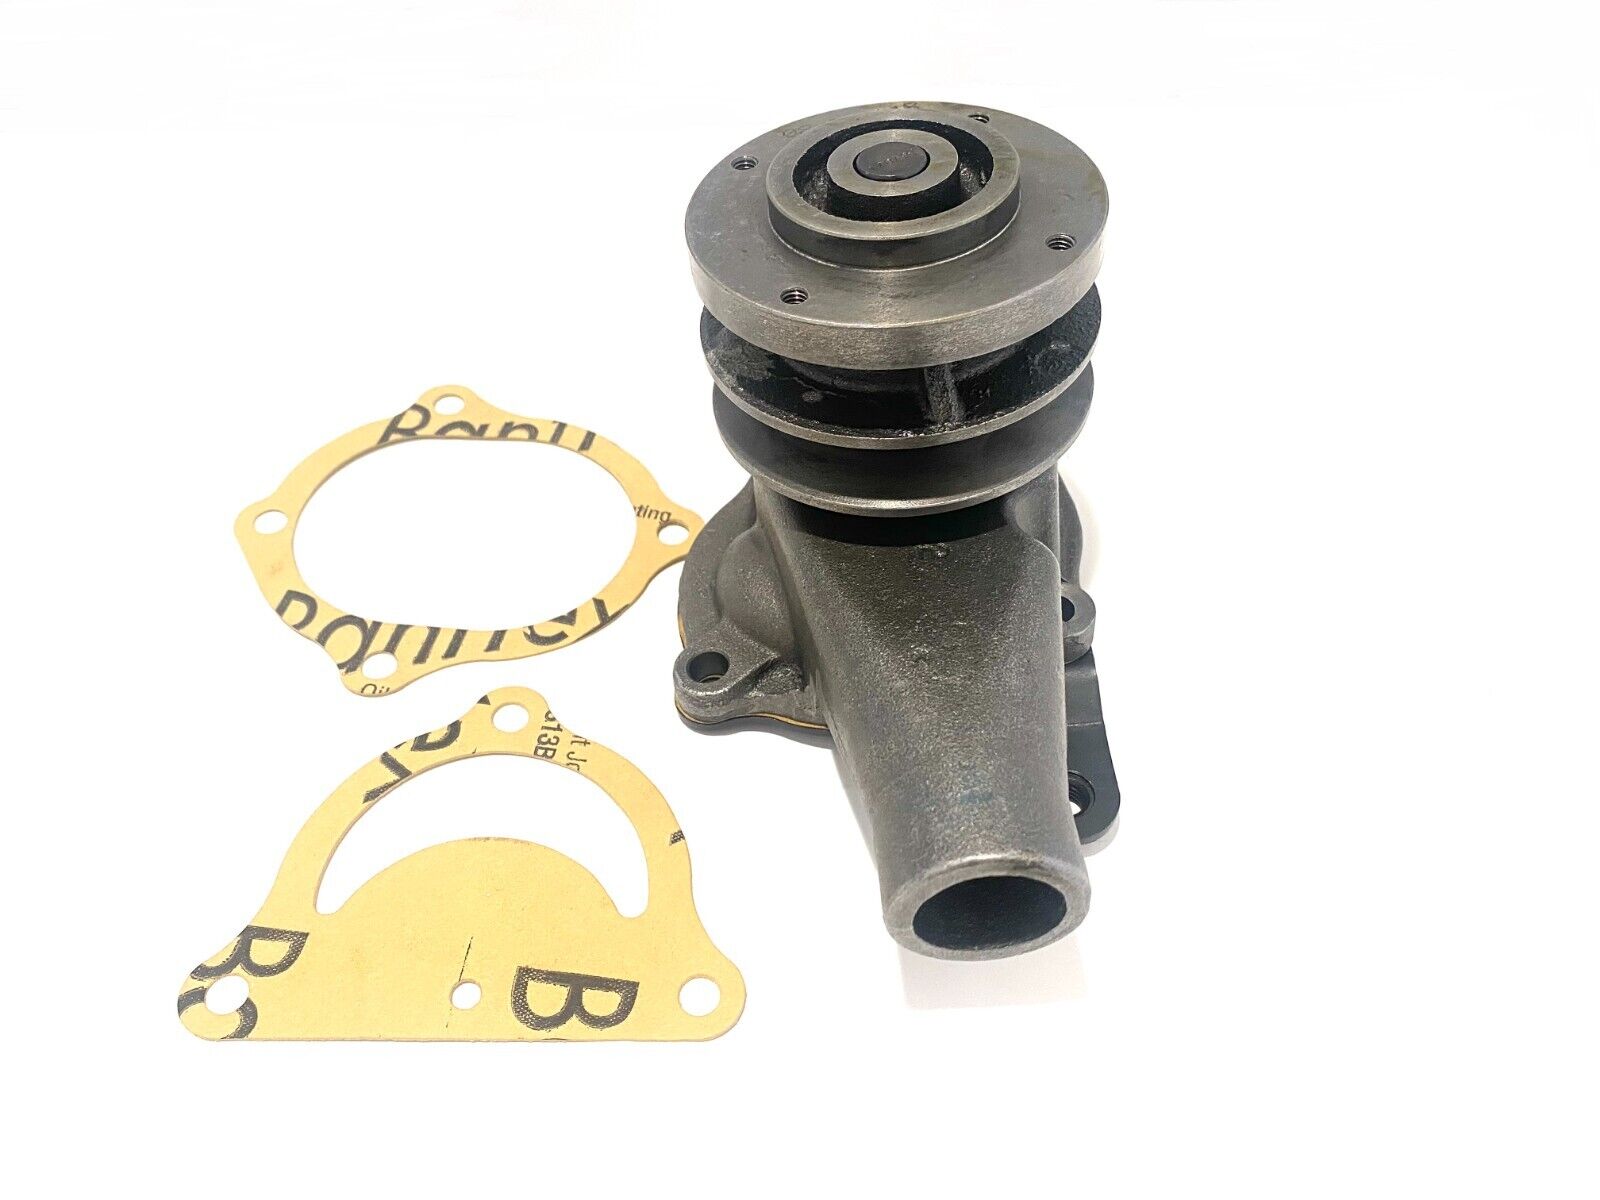 CDPN8501A For Ford Tractors 2N 8N 9N Water Pump Comes with Gaskets and Pulley Arko Tractor Parts CDPN8501A - фотография #2